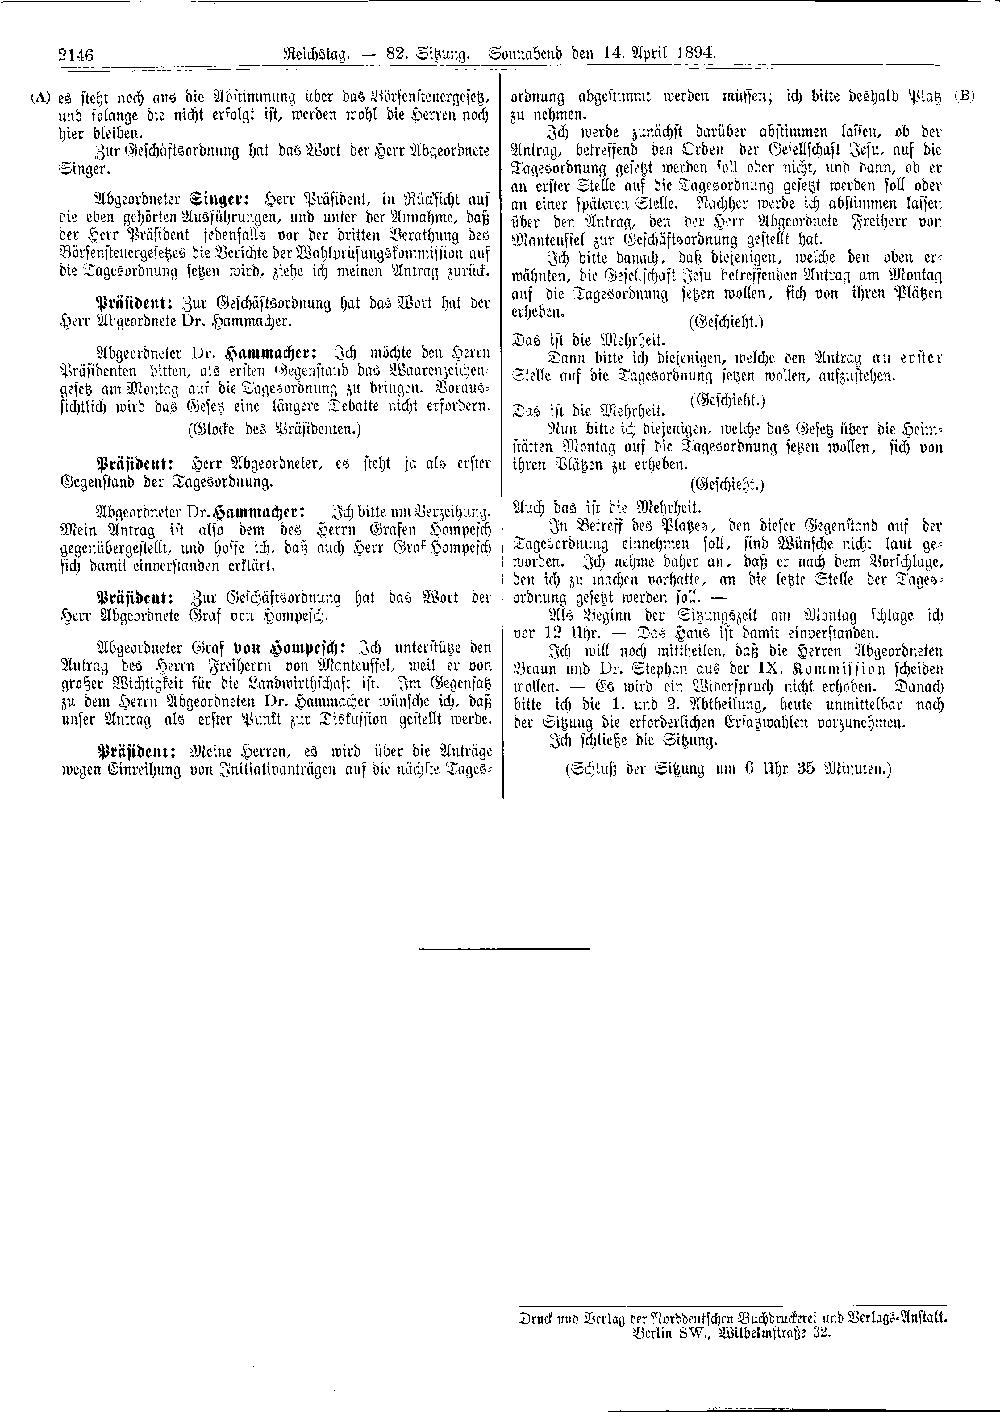 Scan of page 2146